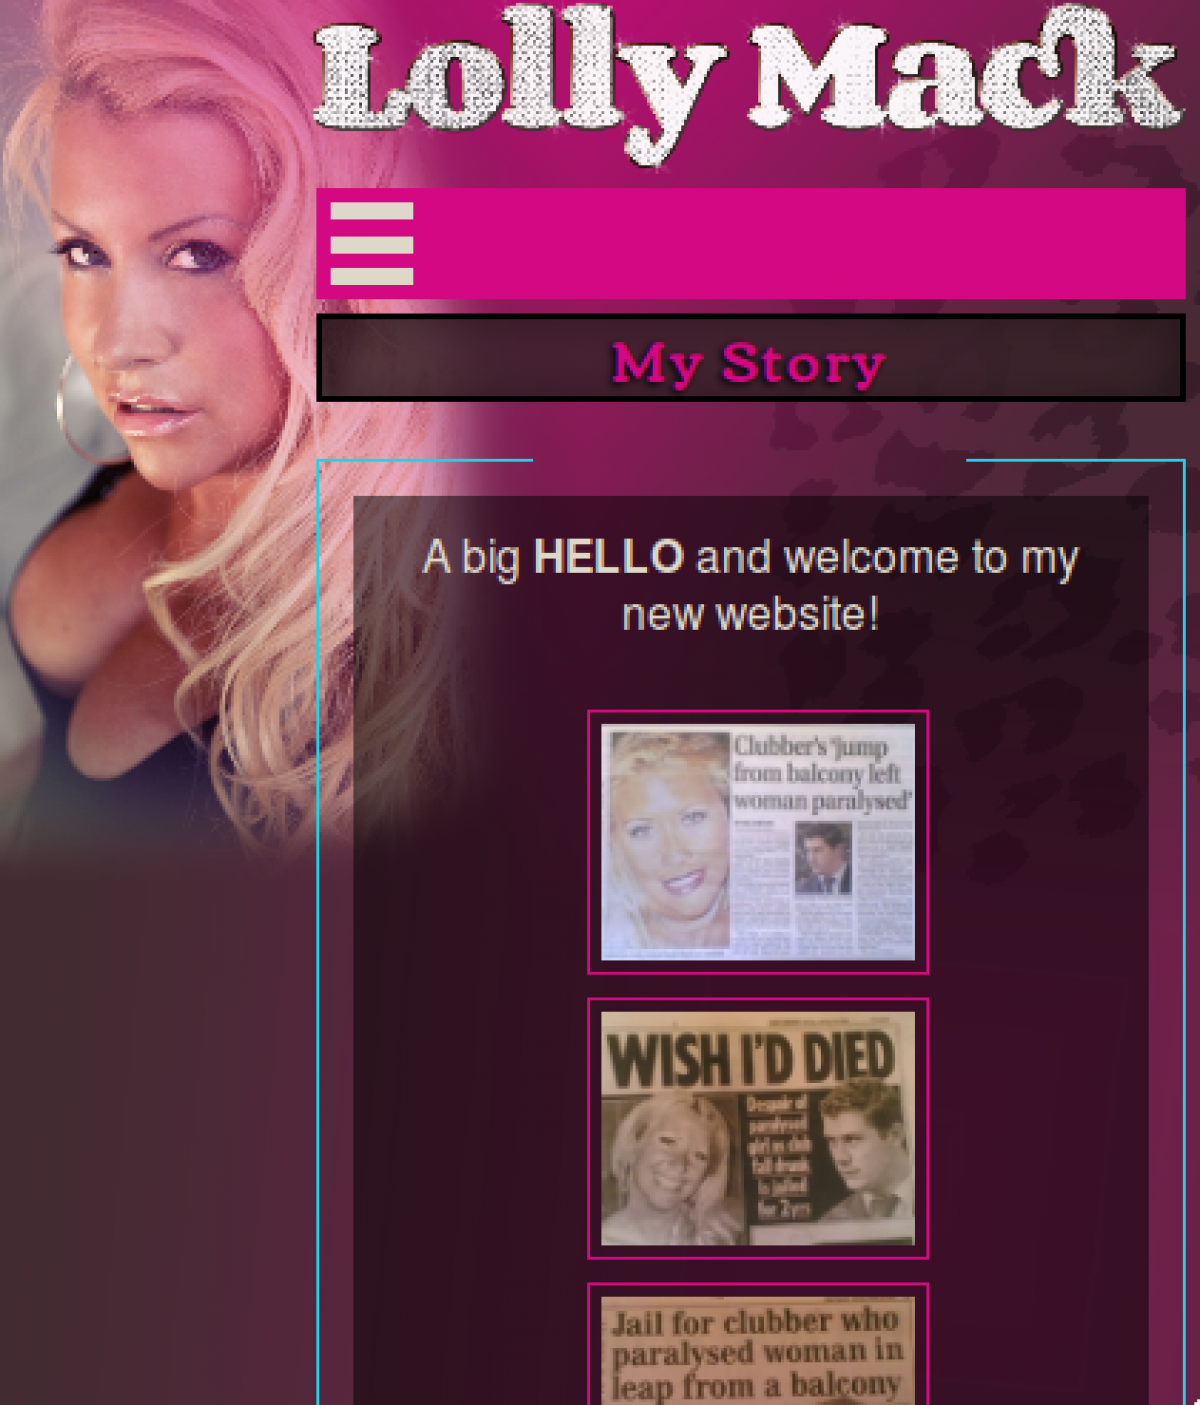 Lolly Mack home page on mobile